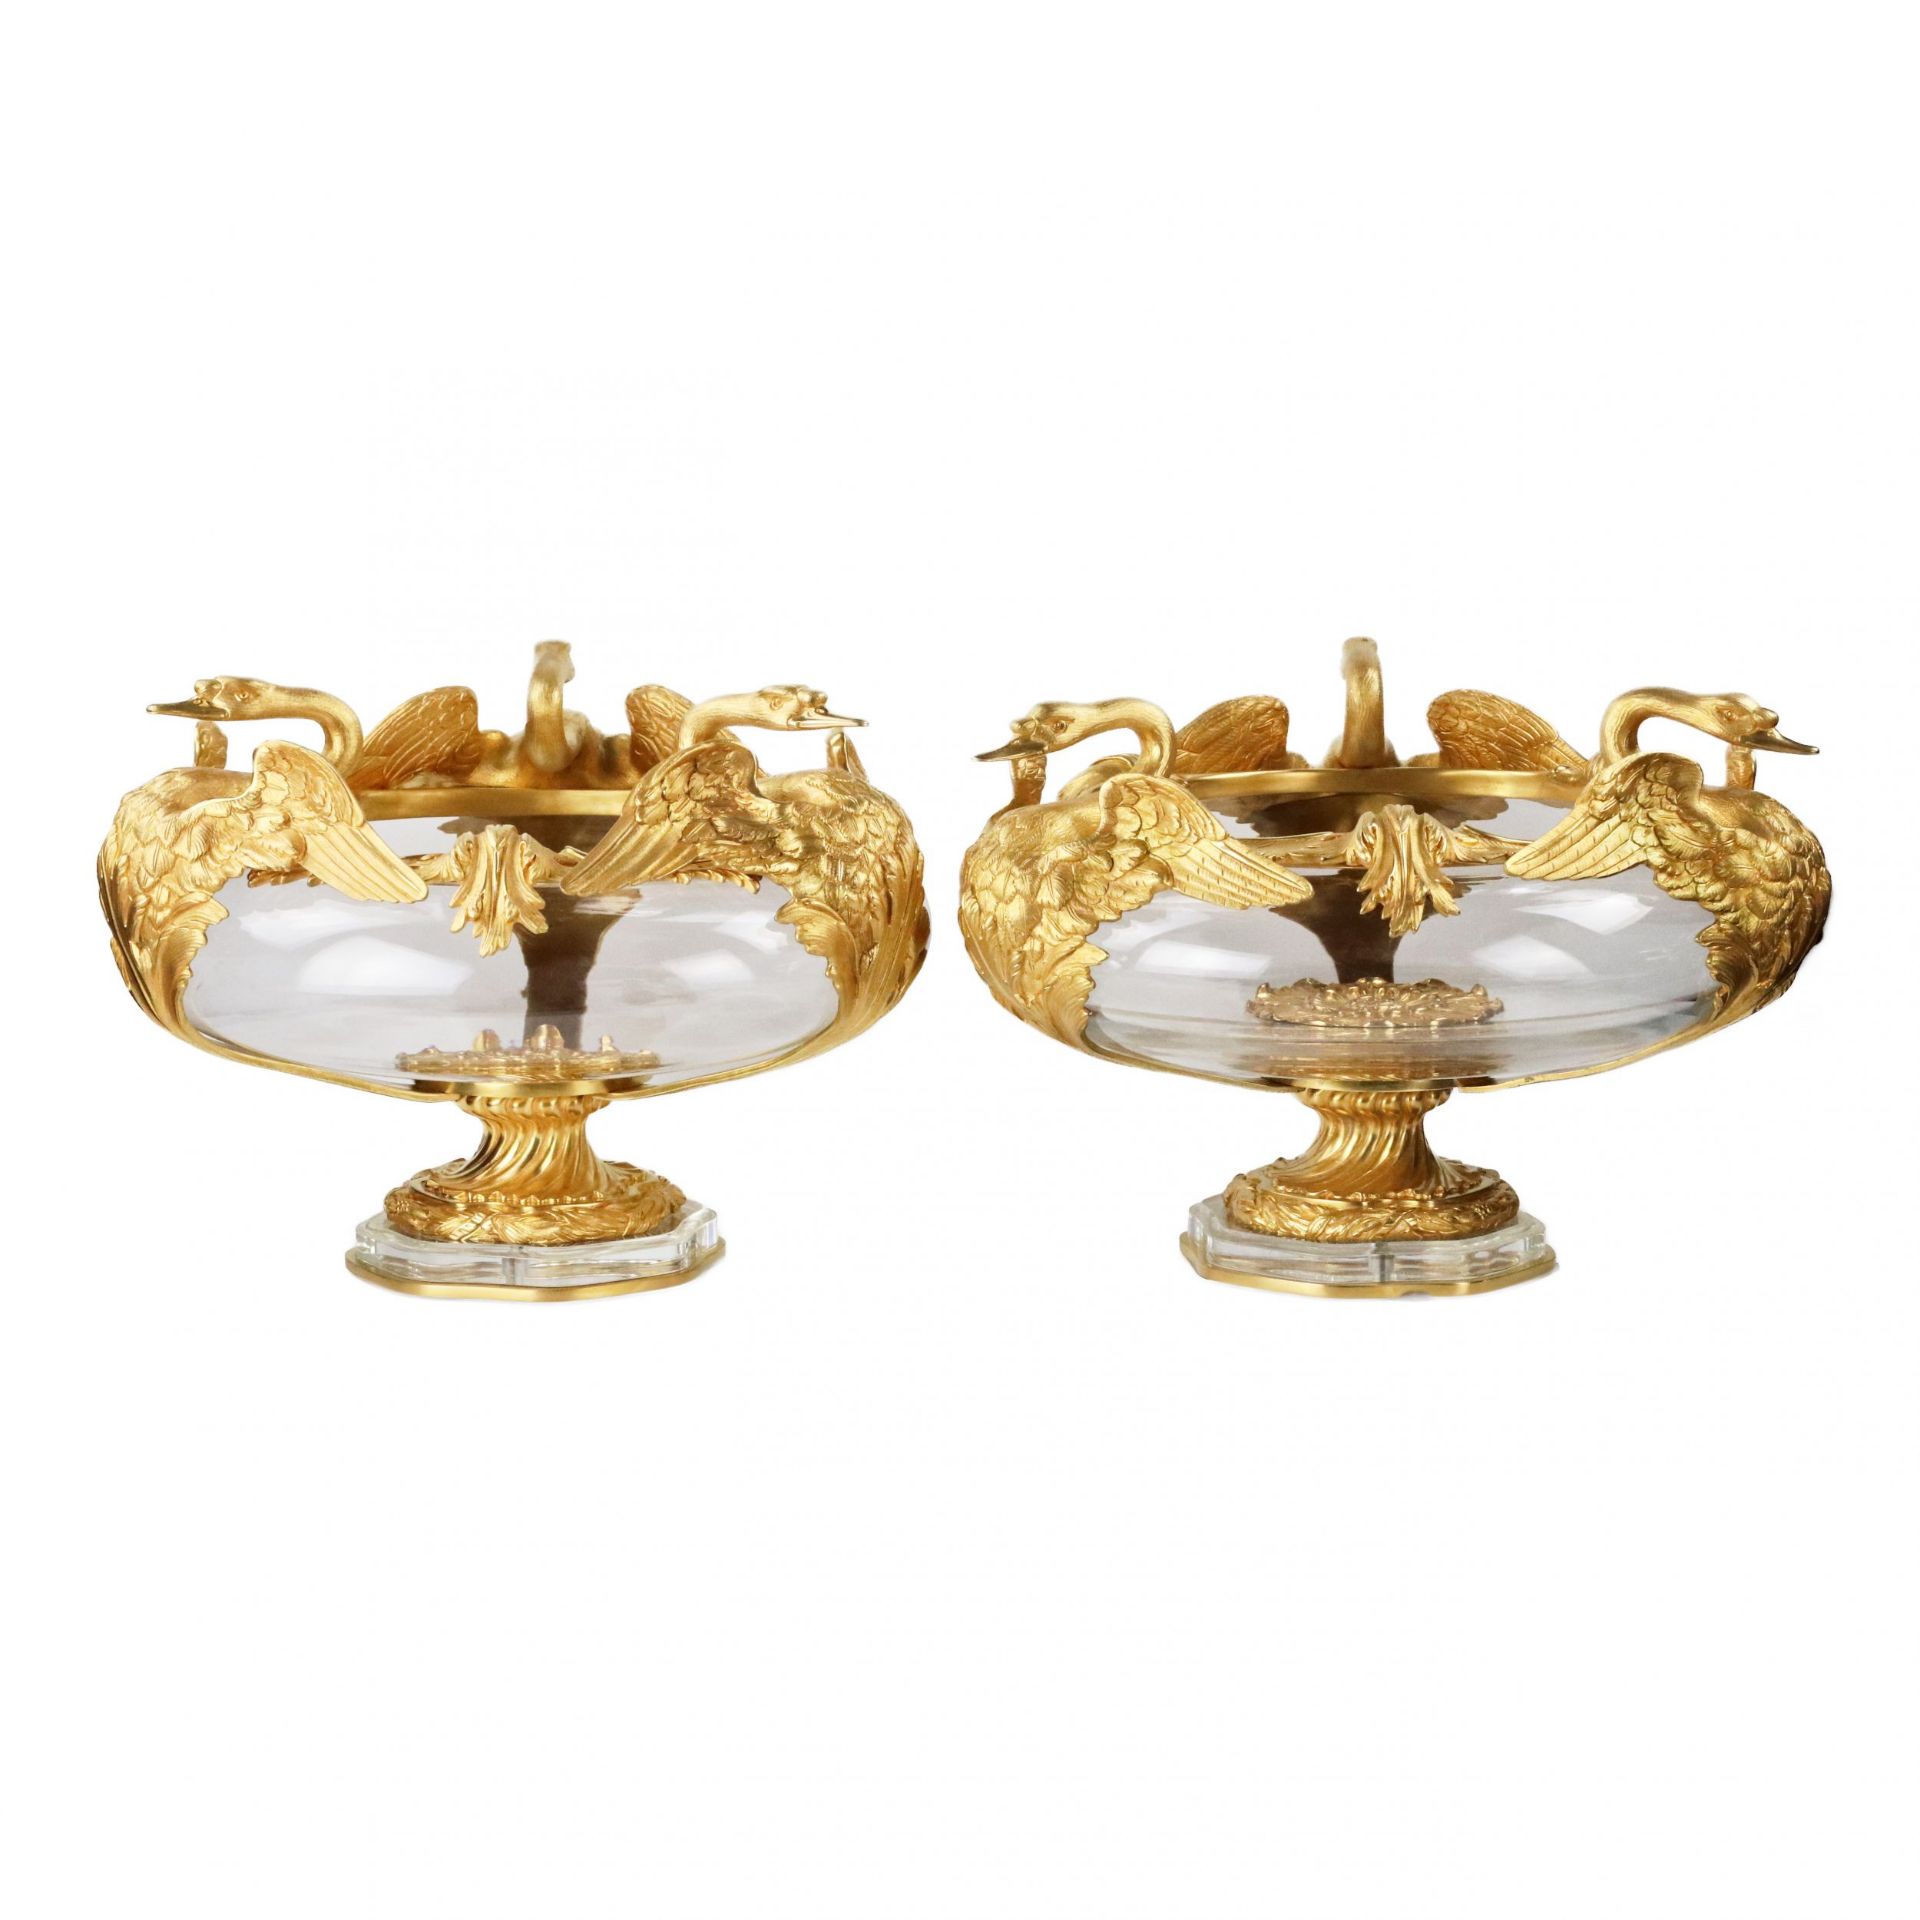 Pair of round vases in cast glass and gilded bronze with swans motif. France 20th century. - Image 3 of 8